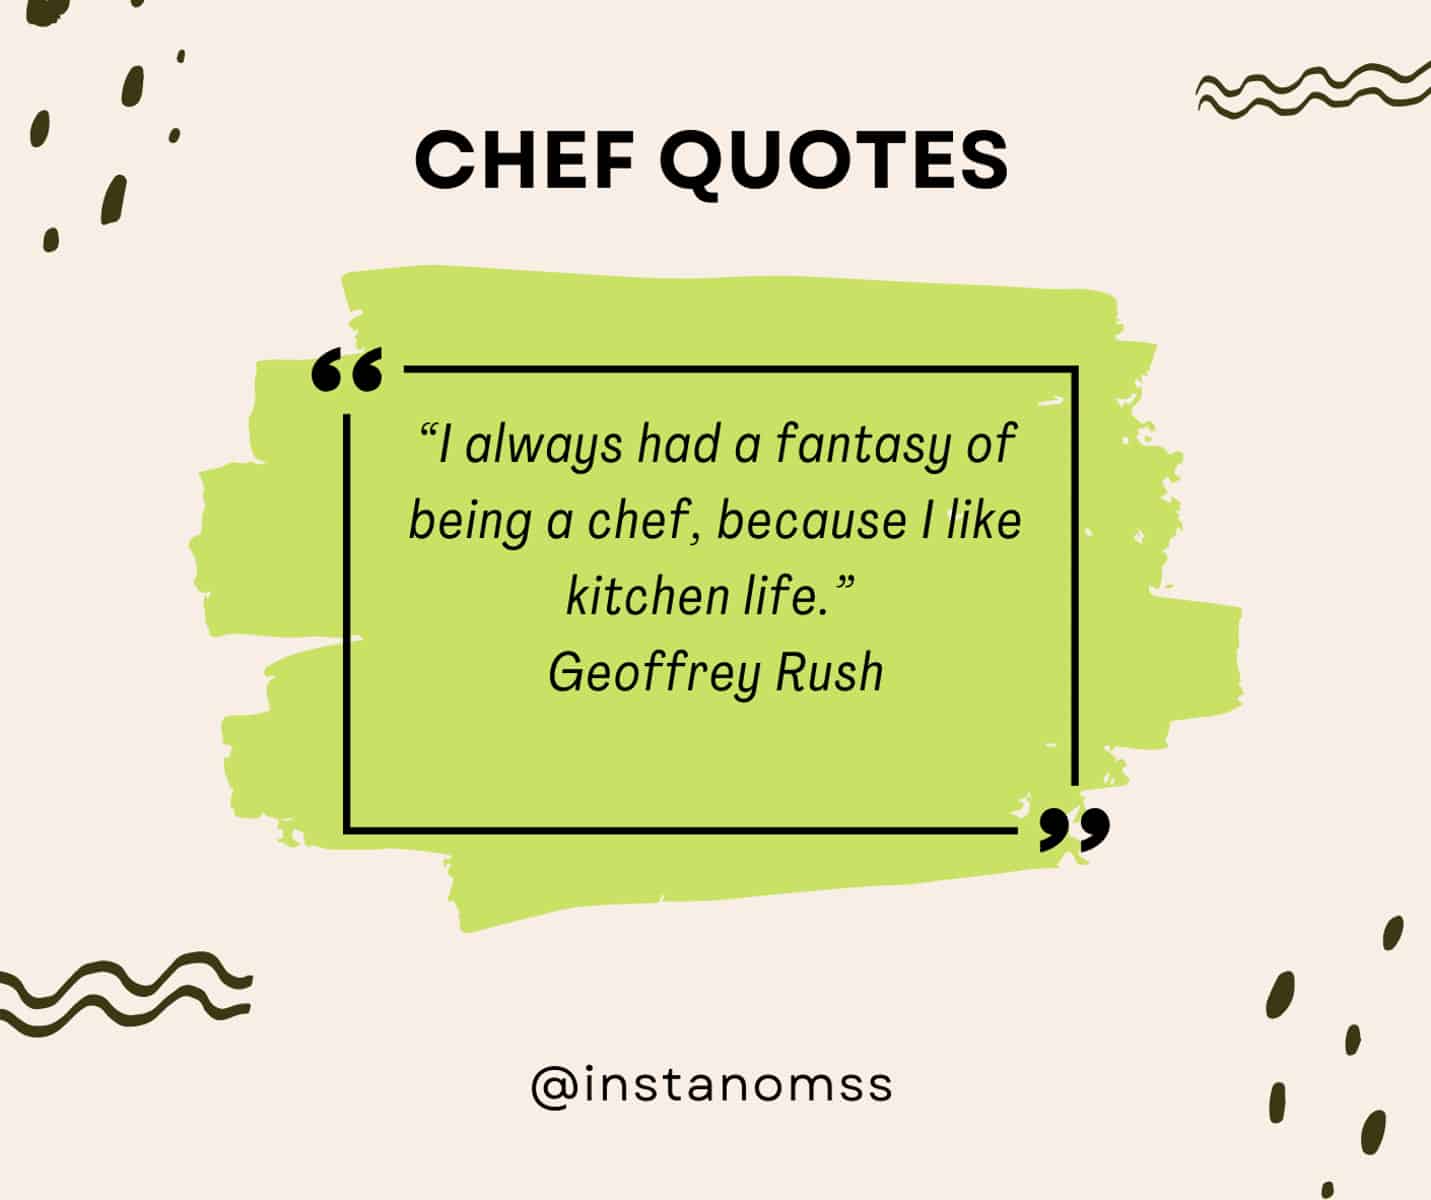 “I always had a fantasy of being a chef, because I like kitchen life.” Geoffrey Rush